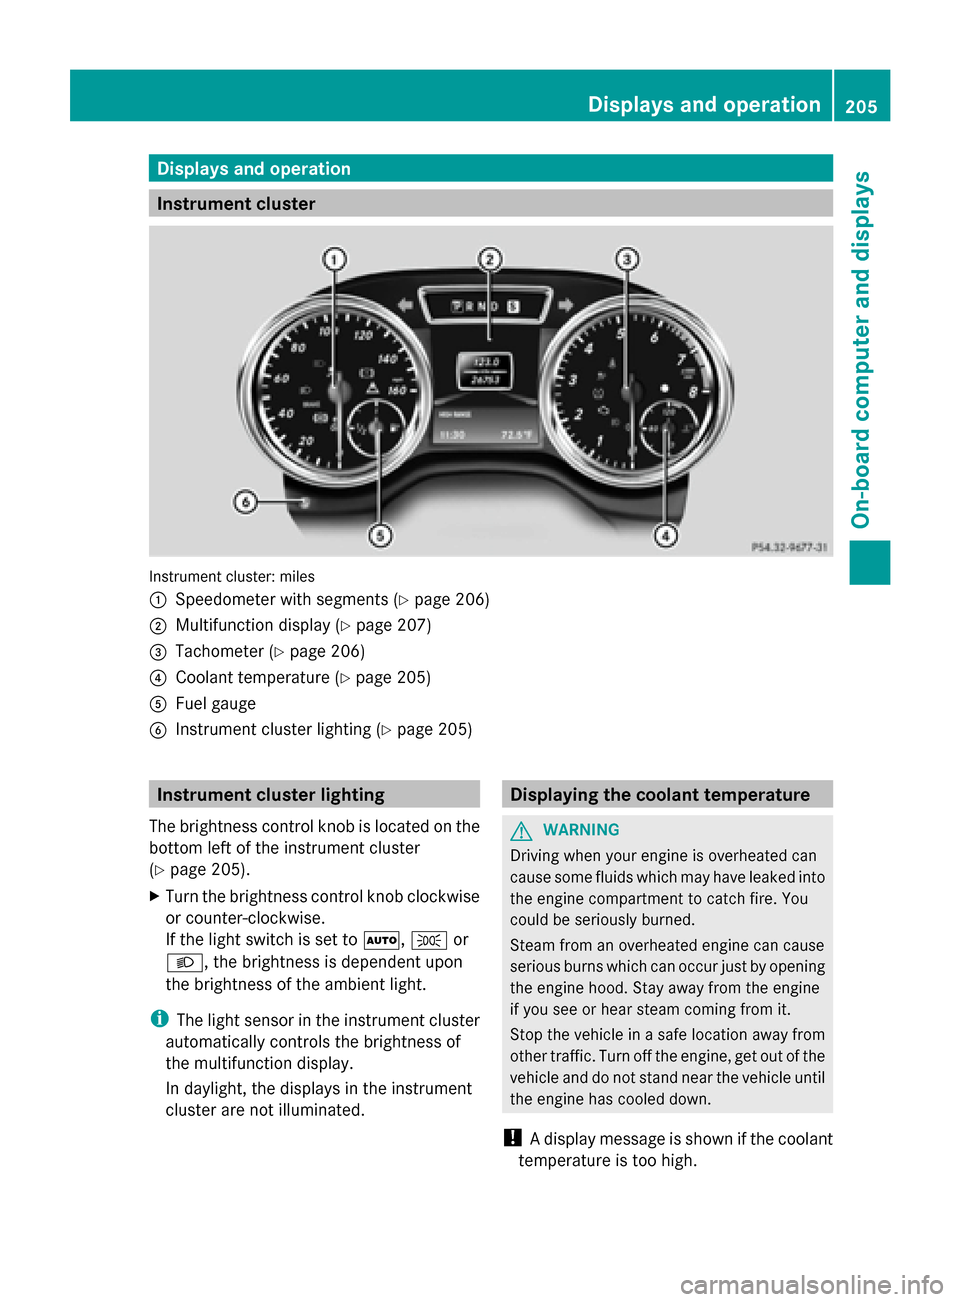 MERCEDES-BENZ G-Class 2014 W463 Owners Manual Displays and operation
Instrument cluster
Instrument cluster: miles
0043
Speedometer with segments (Y page 206)
0044 Multifunction display (Y page 207)
0087 Tachometer (Y page 206)
0085 Coolant temper